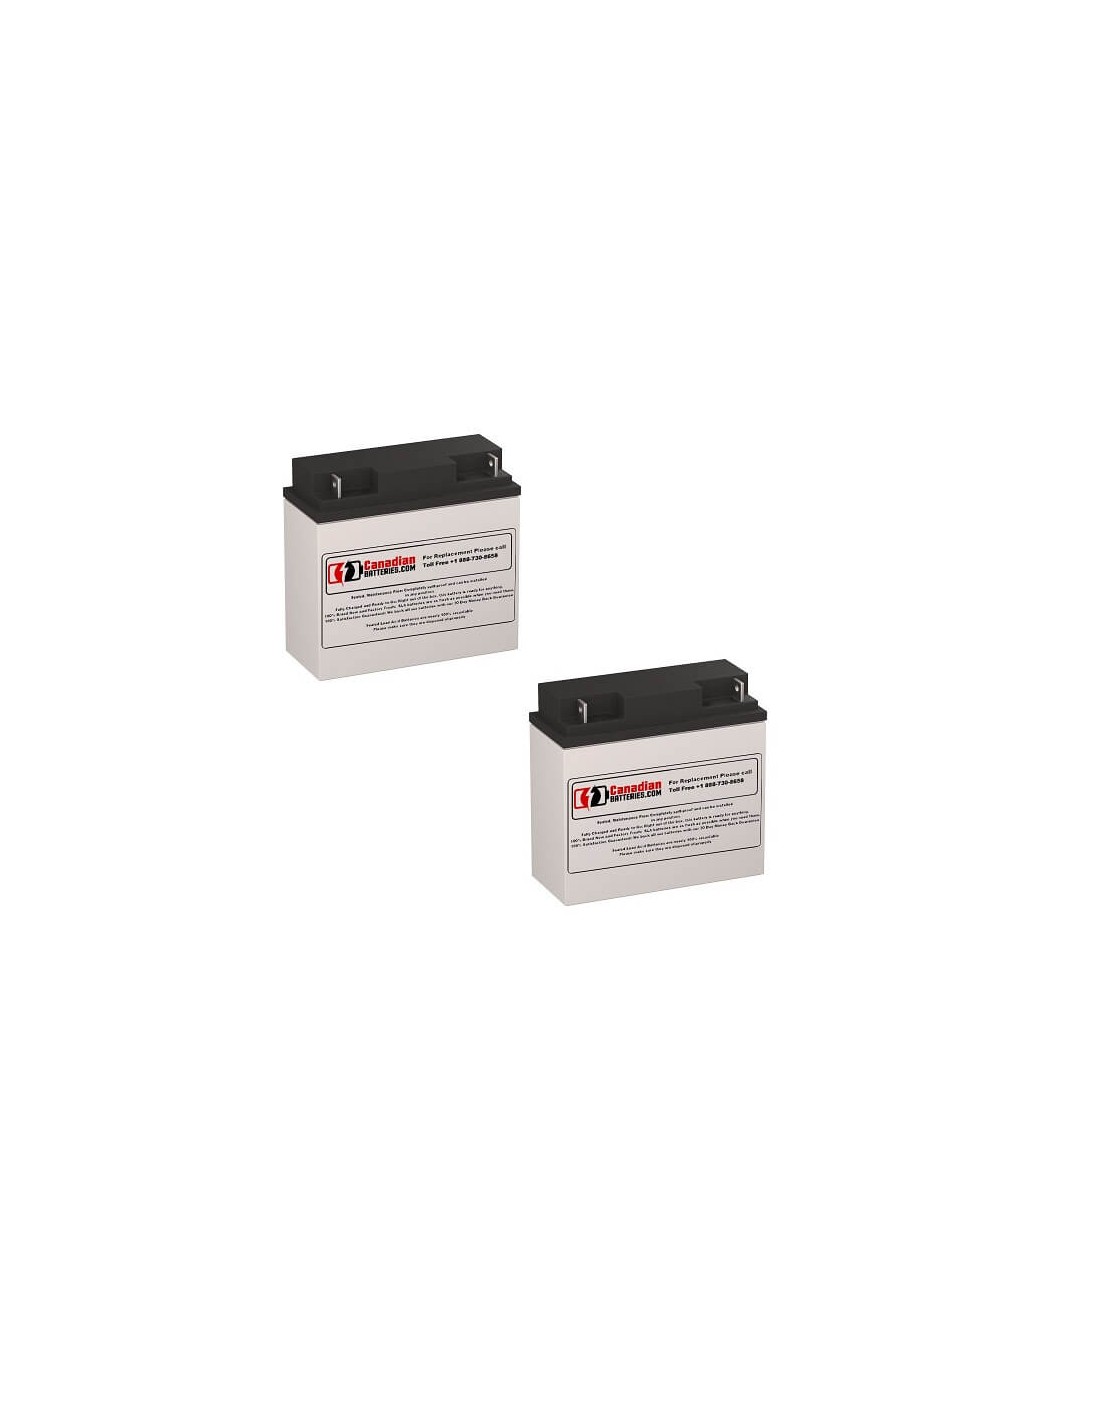 Batteries for Oneac On1300a-sn UPS, 2 x 12V, 18Ah - 216Wh